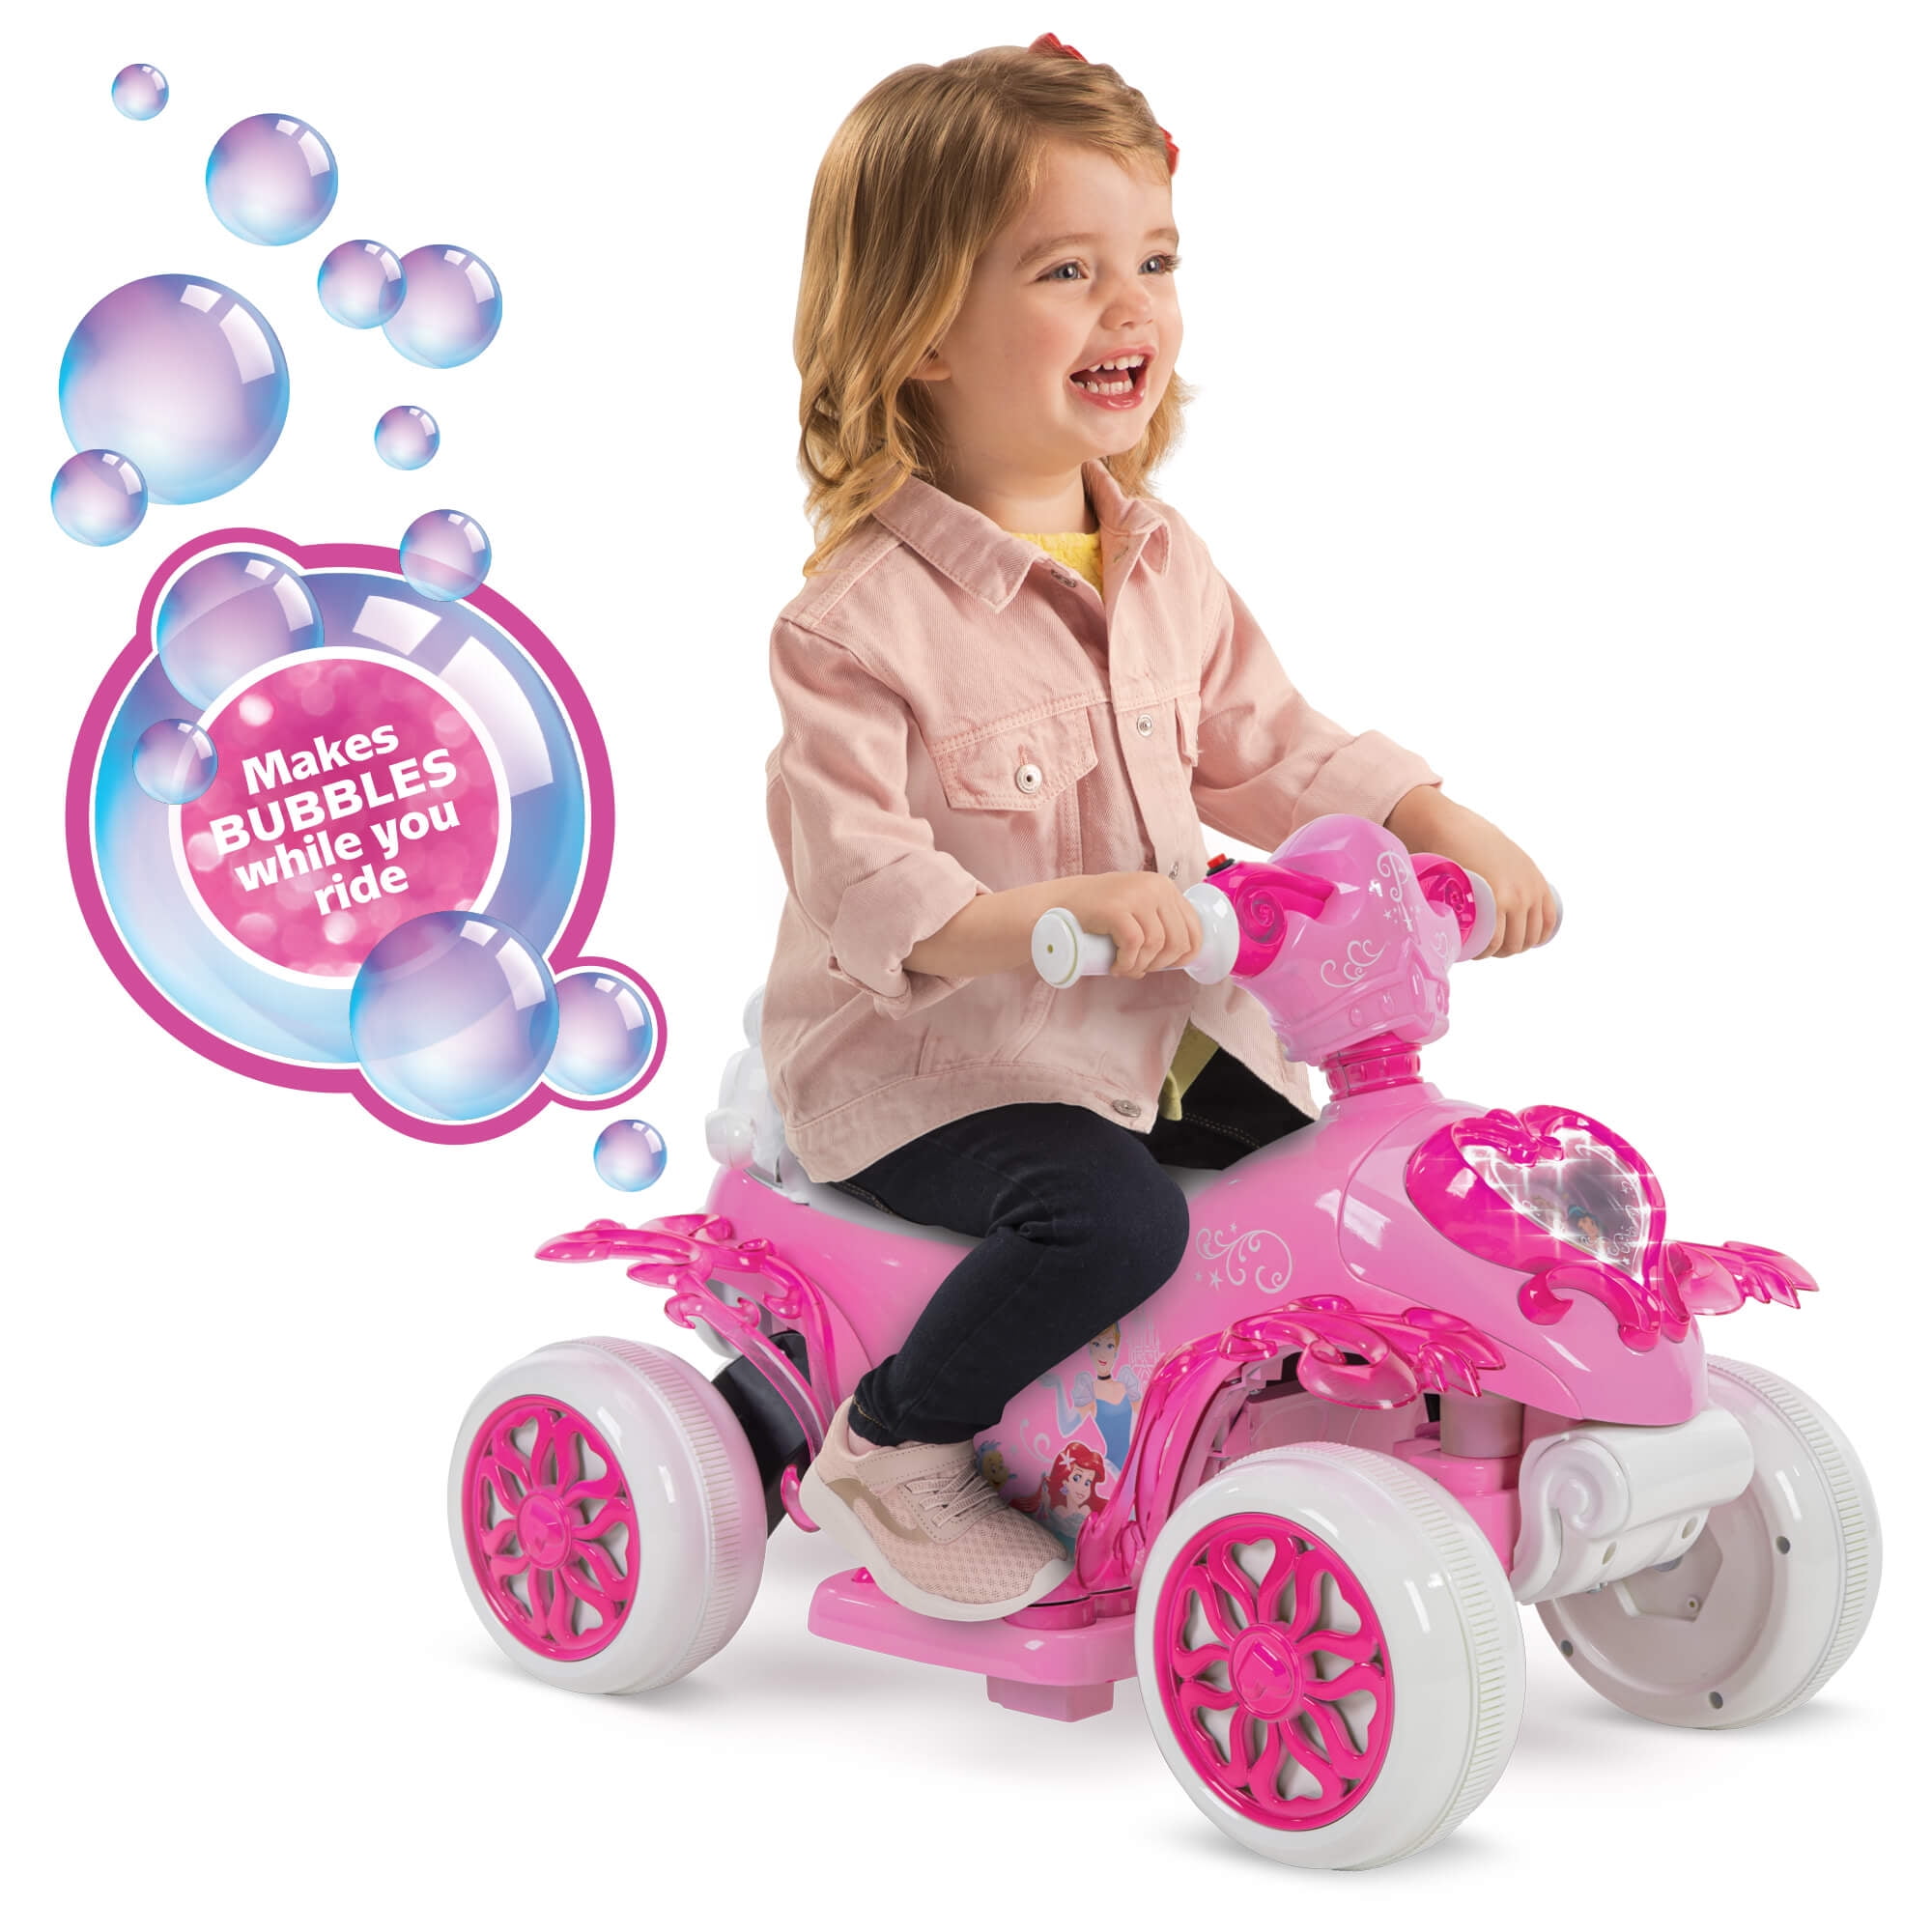 Huffy 6V Quad Trailer Ride on Toy for Kids Pink NEW 